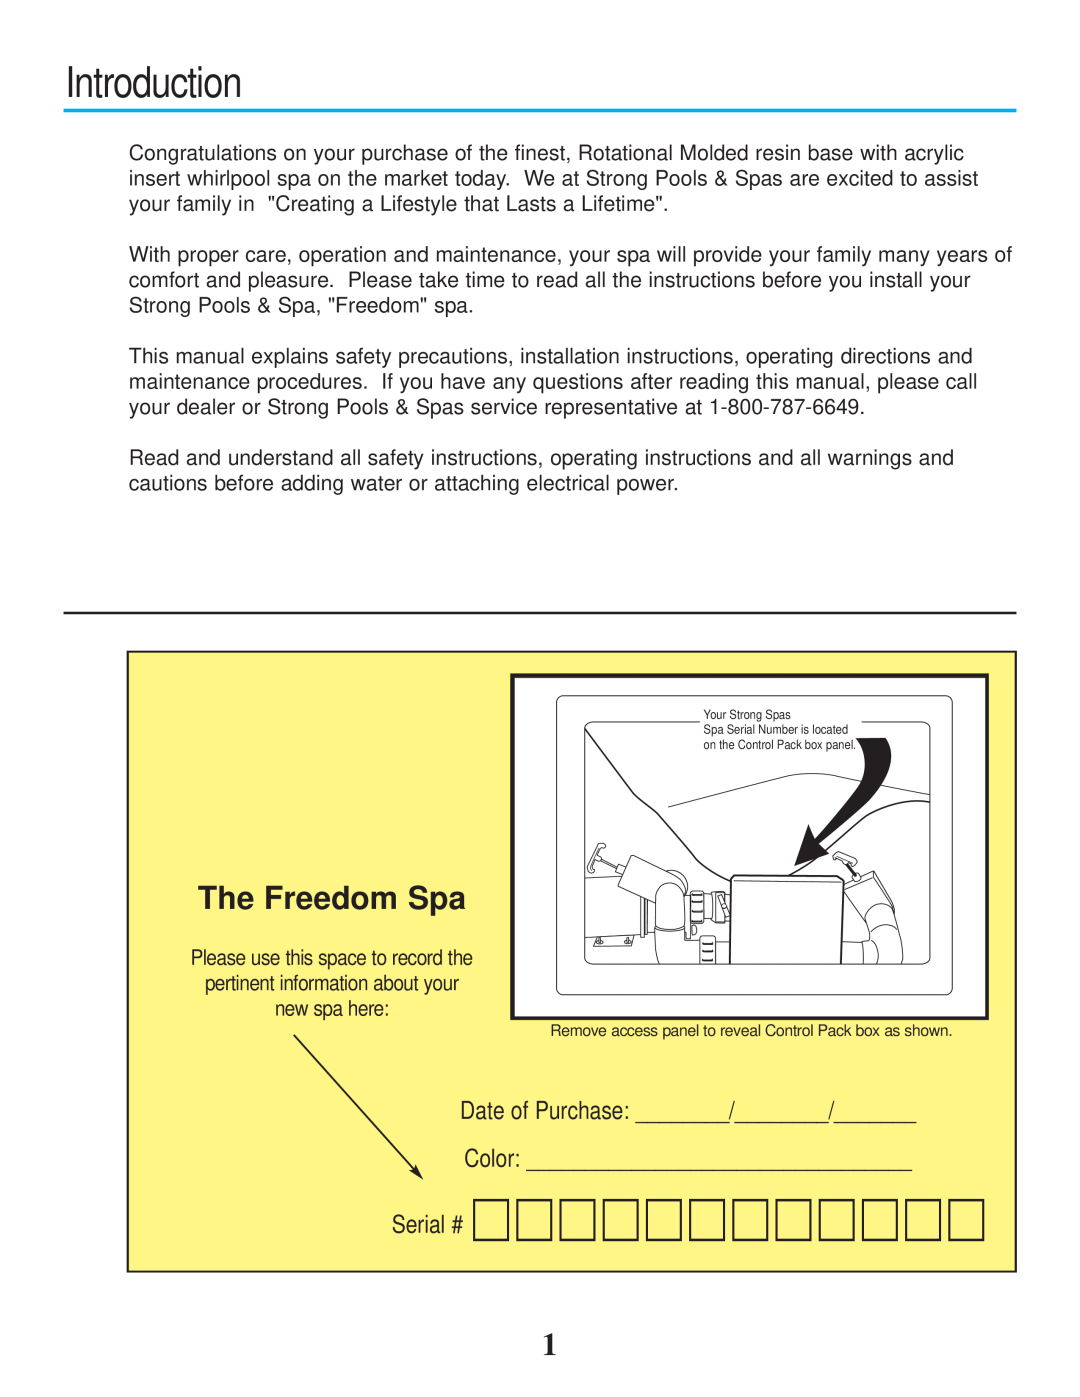 Strong Pools and Spas owner manual Introduction, The Freedom Spa, Date of Purchase 